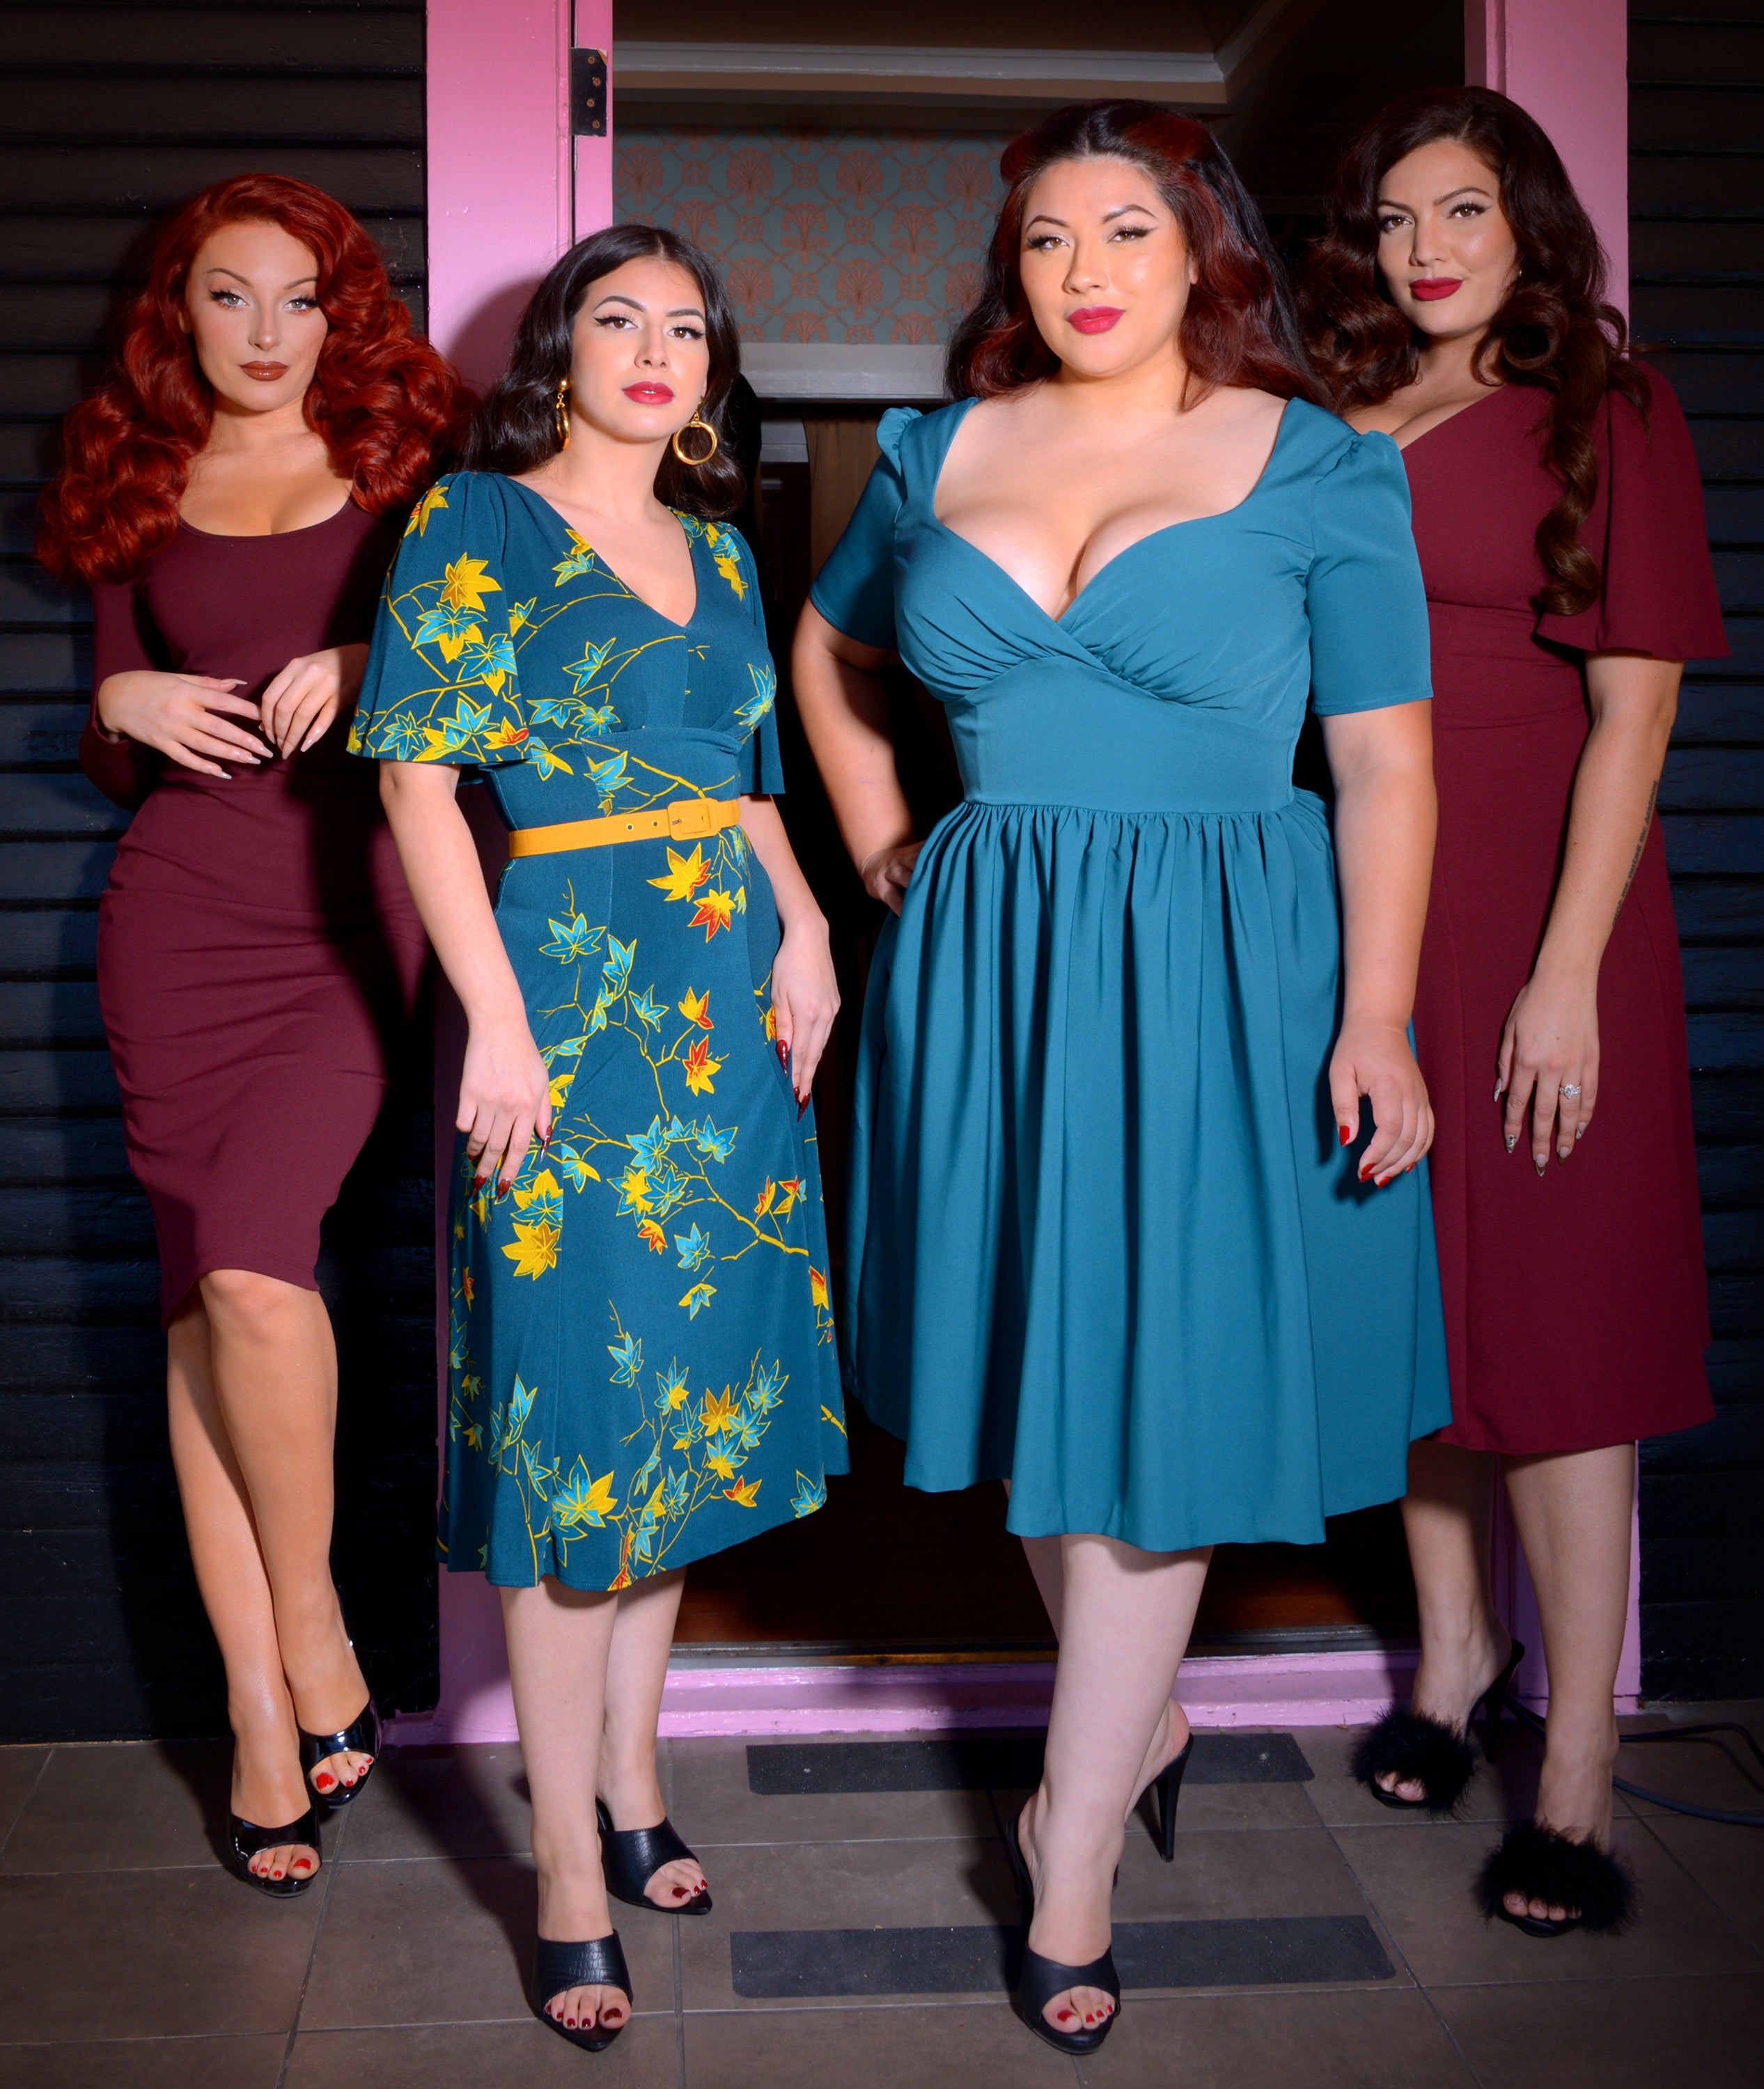 Women's Vintage Inspired Clothing | Retro Pin-Up Style 40's, 50's 